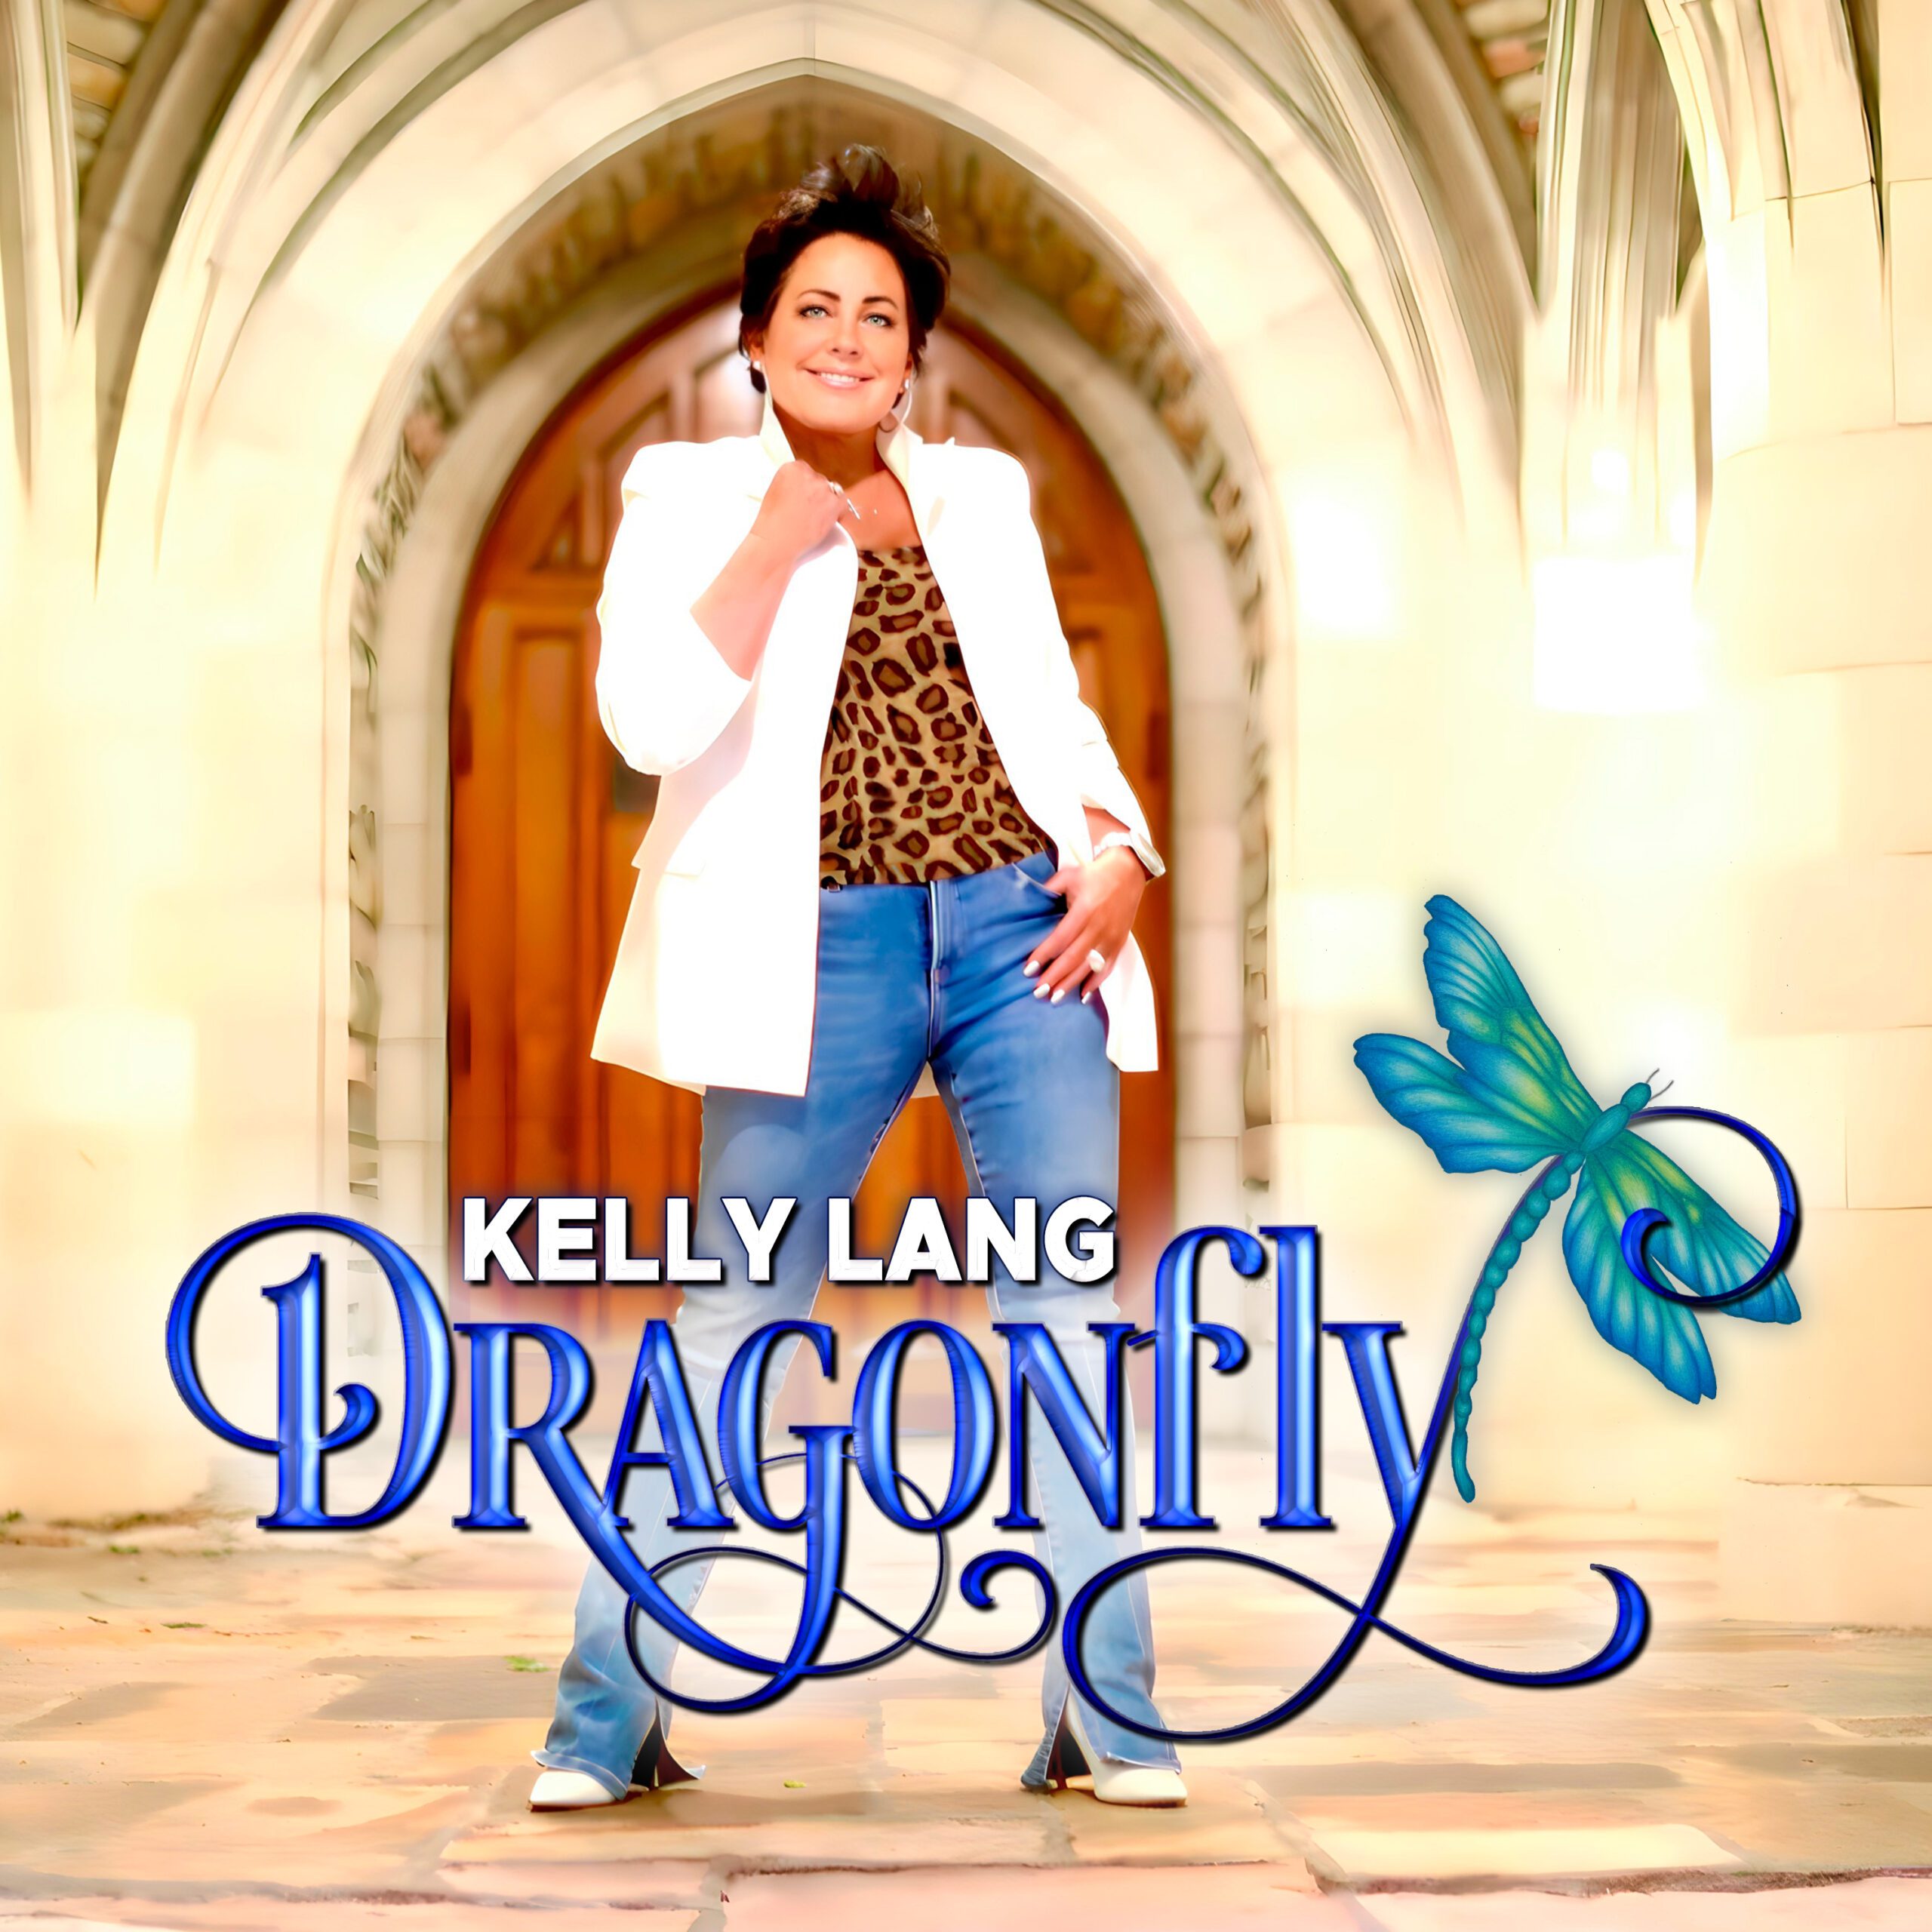 Nationally Acclaimed Singer-Songwriter, Producer, And Author Kelly Lang’s Music Video For Current Single “Dragonfly” Premiered Today By Guitar Girl Magazine